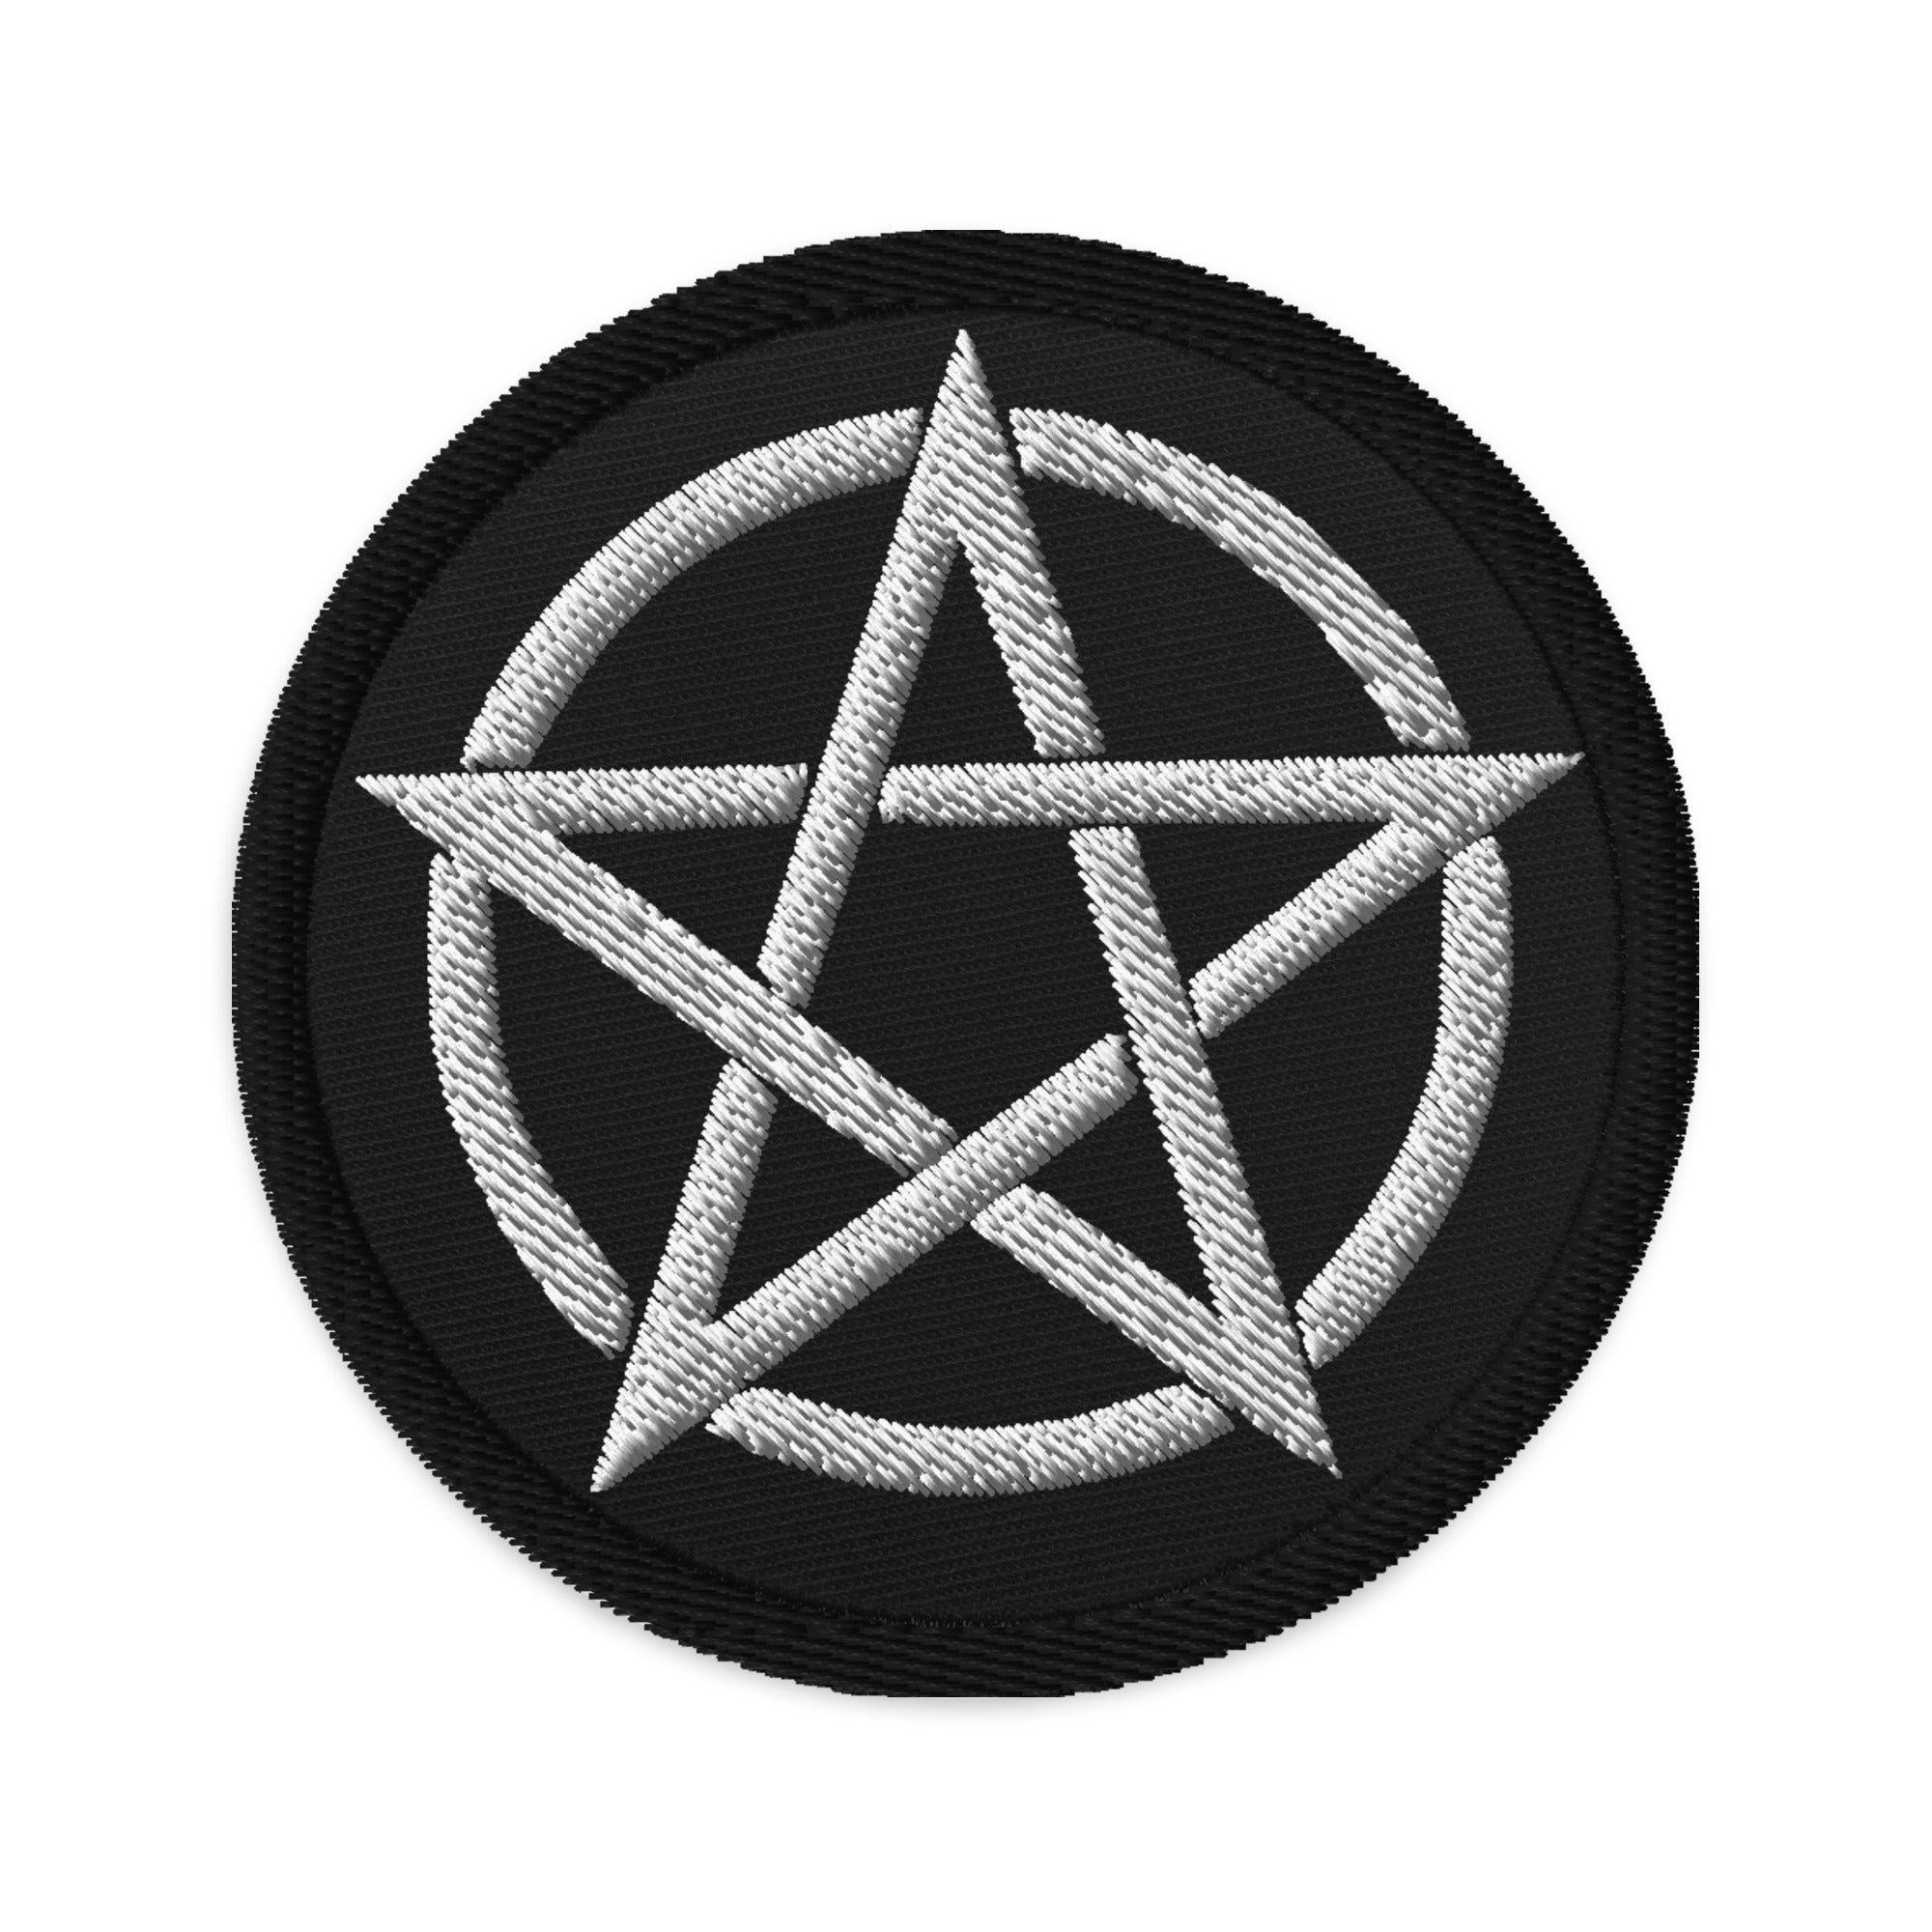 Witchcraft Woven Pentacle Pagan Ritual Embroidered Patch Pentagram - Edge of Life Designs